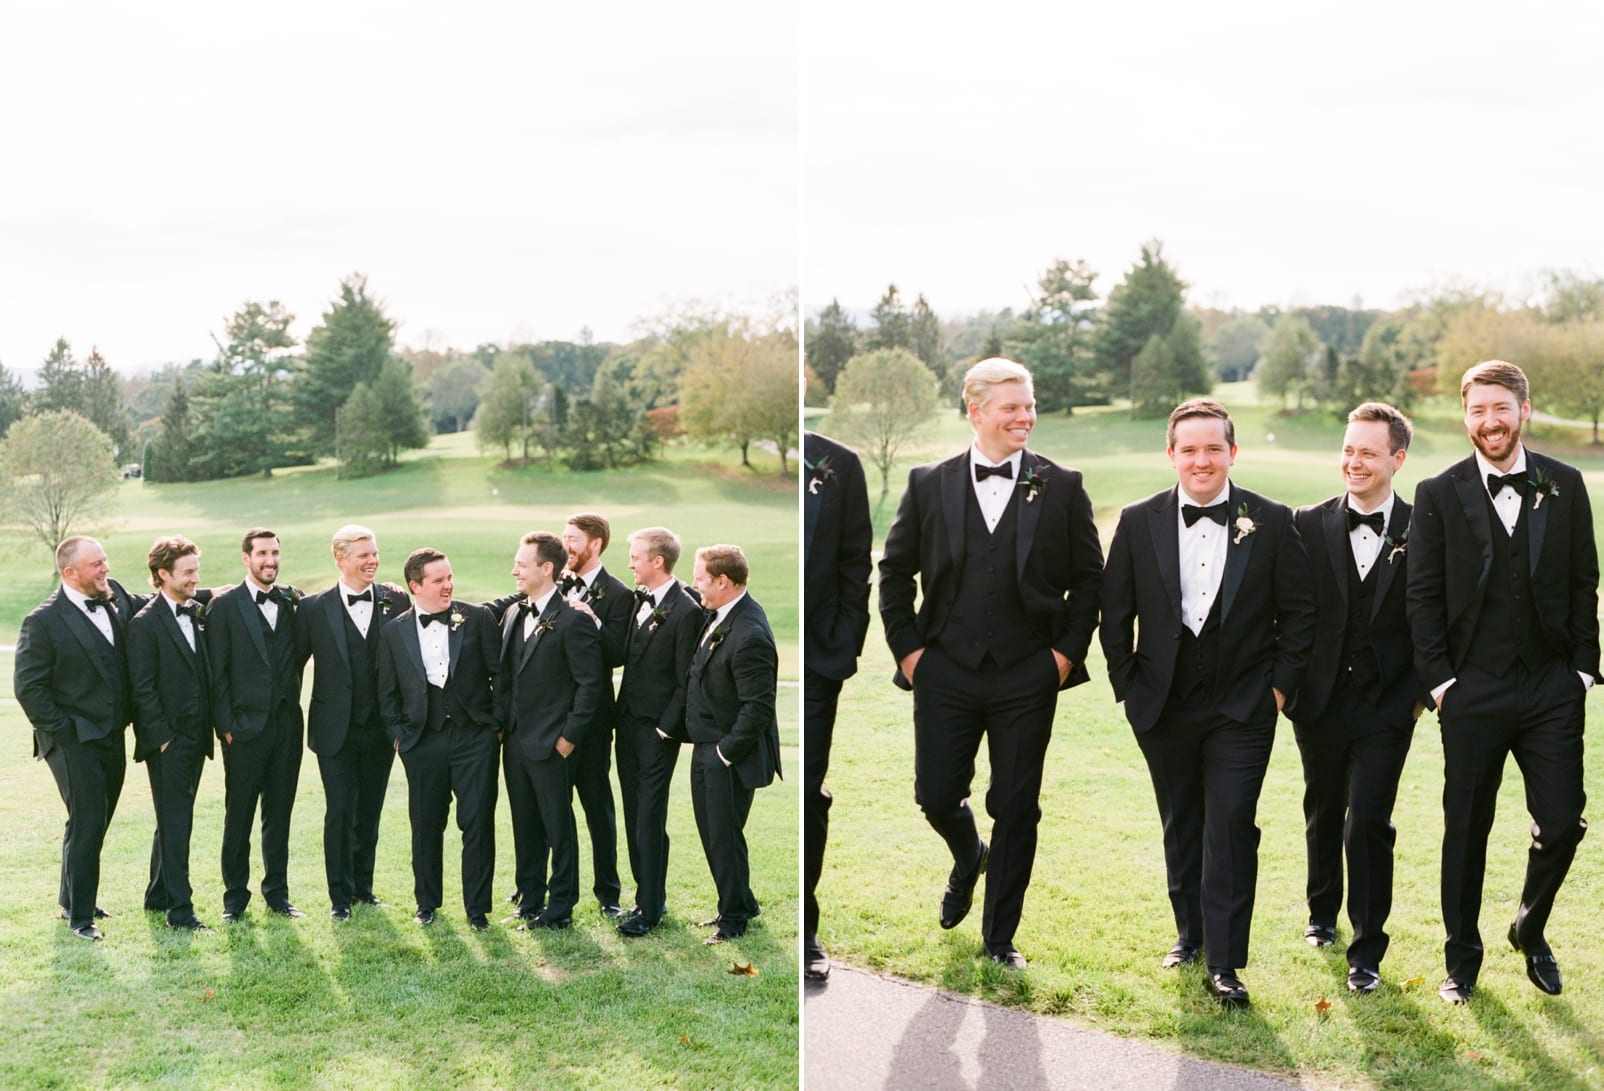 Asheville, NC groom and groomsmen in black tuxes walking and laughing together photo